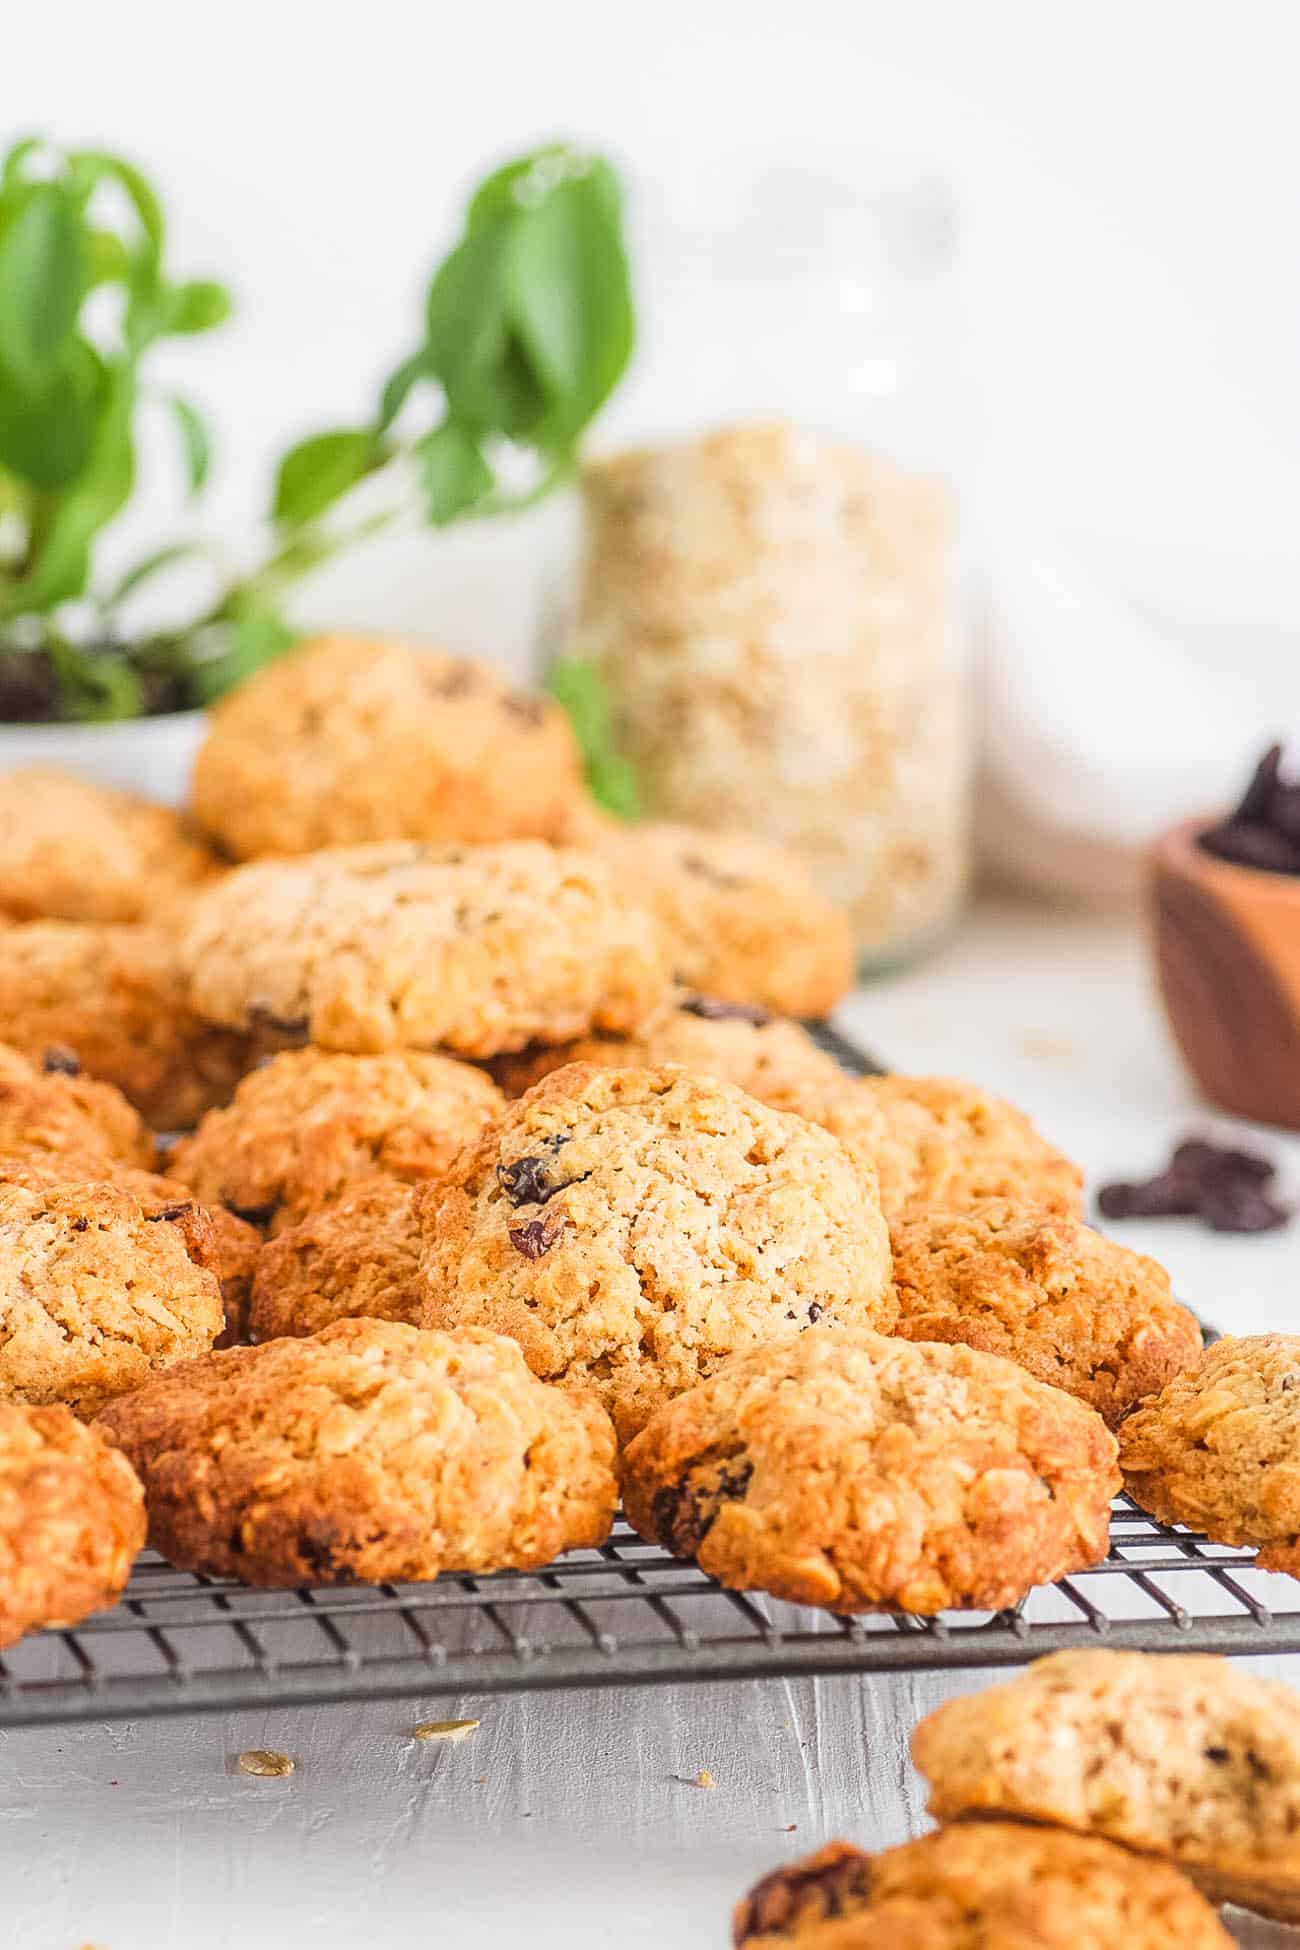 healthy sugar free oatmeal cookies recipe with raisins on a wire rack